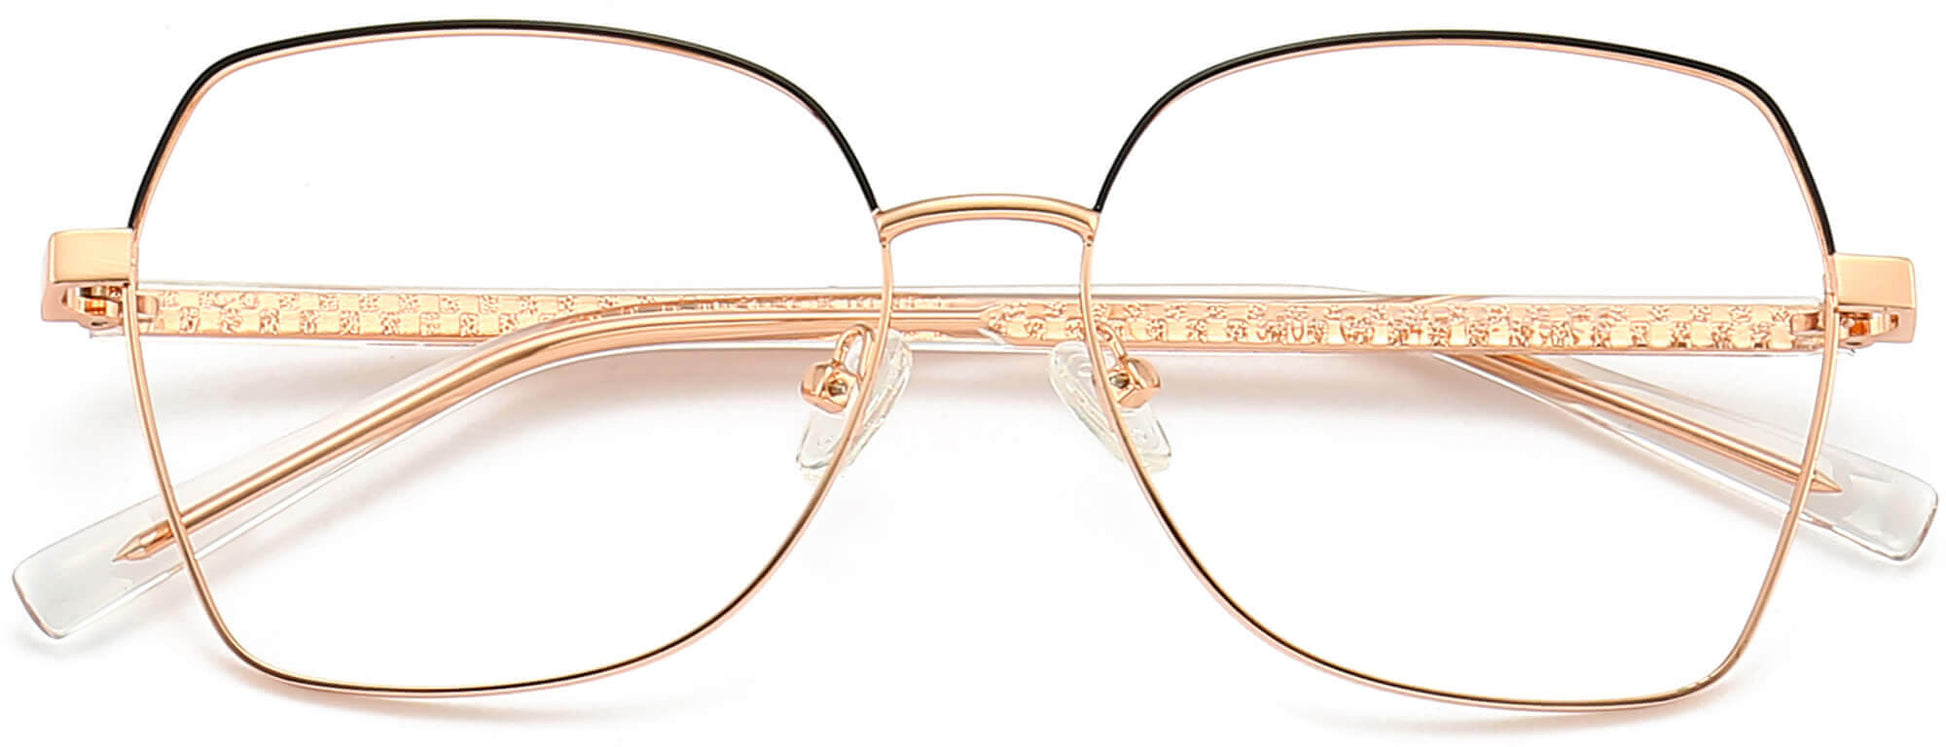 Emely Geometric Gold Eyeglasses from ANRRI, closed view